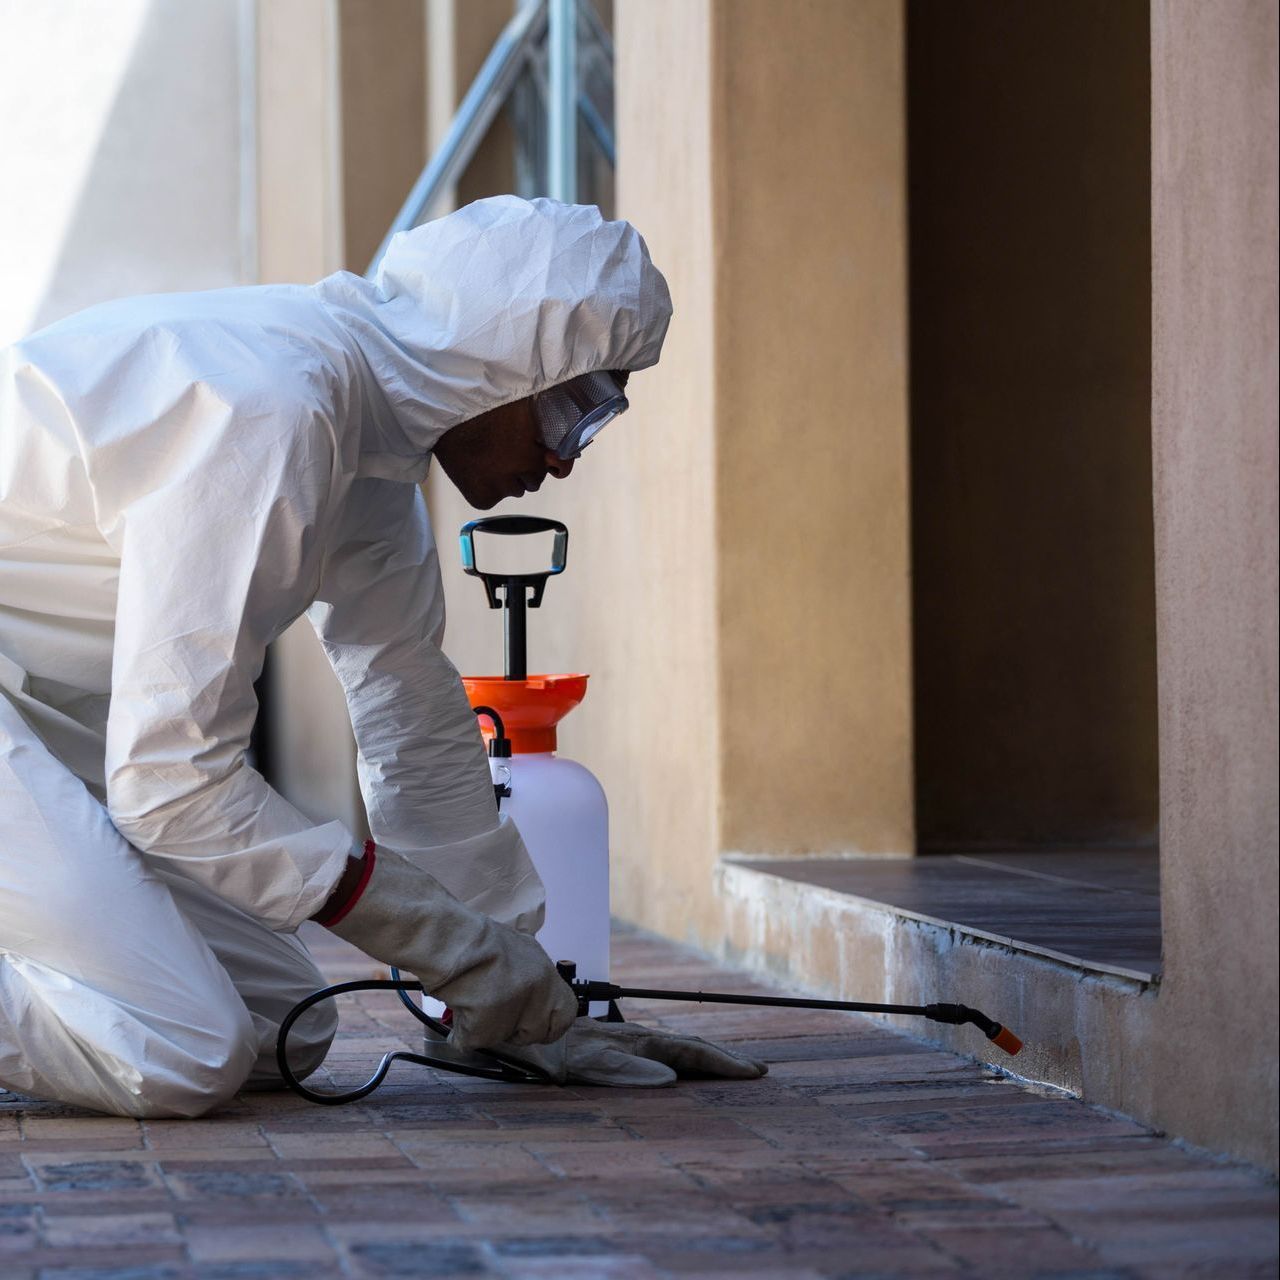 a man in a protective suit is kneeling down on the ground .